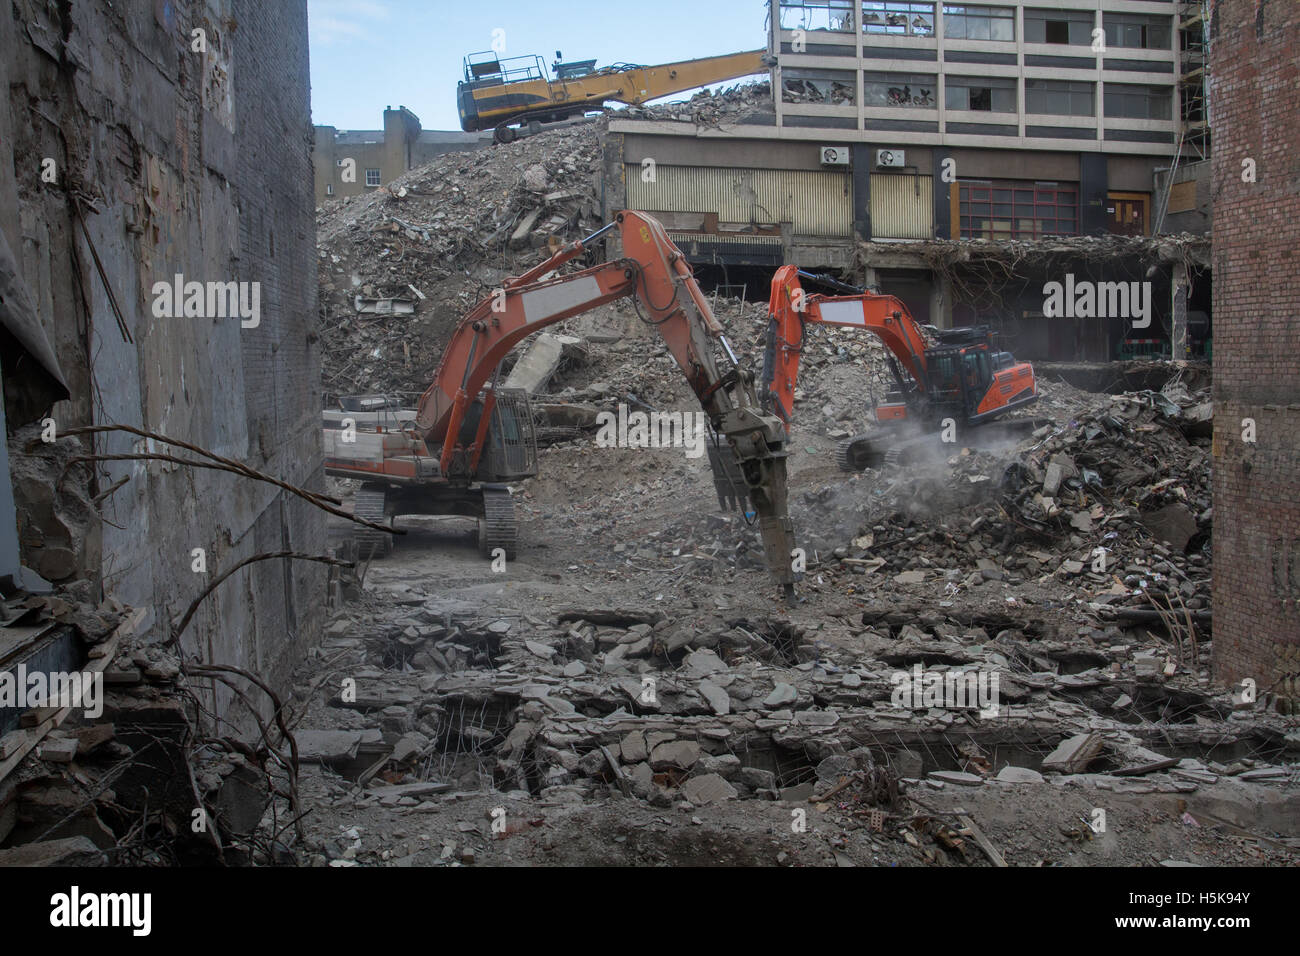 Heavy plant machinery wrecking and breaking up buildings on an inner city demolition site that looks like a war zone. Stock Photo